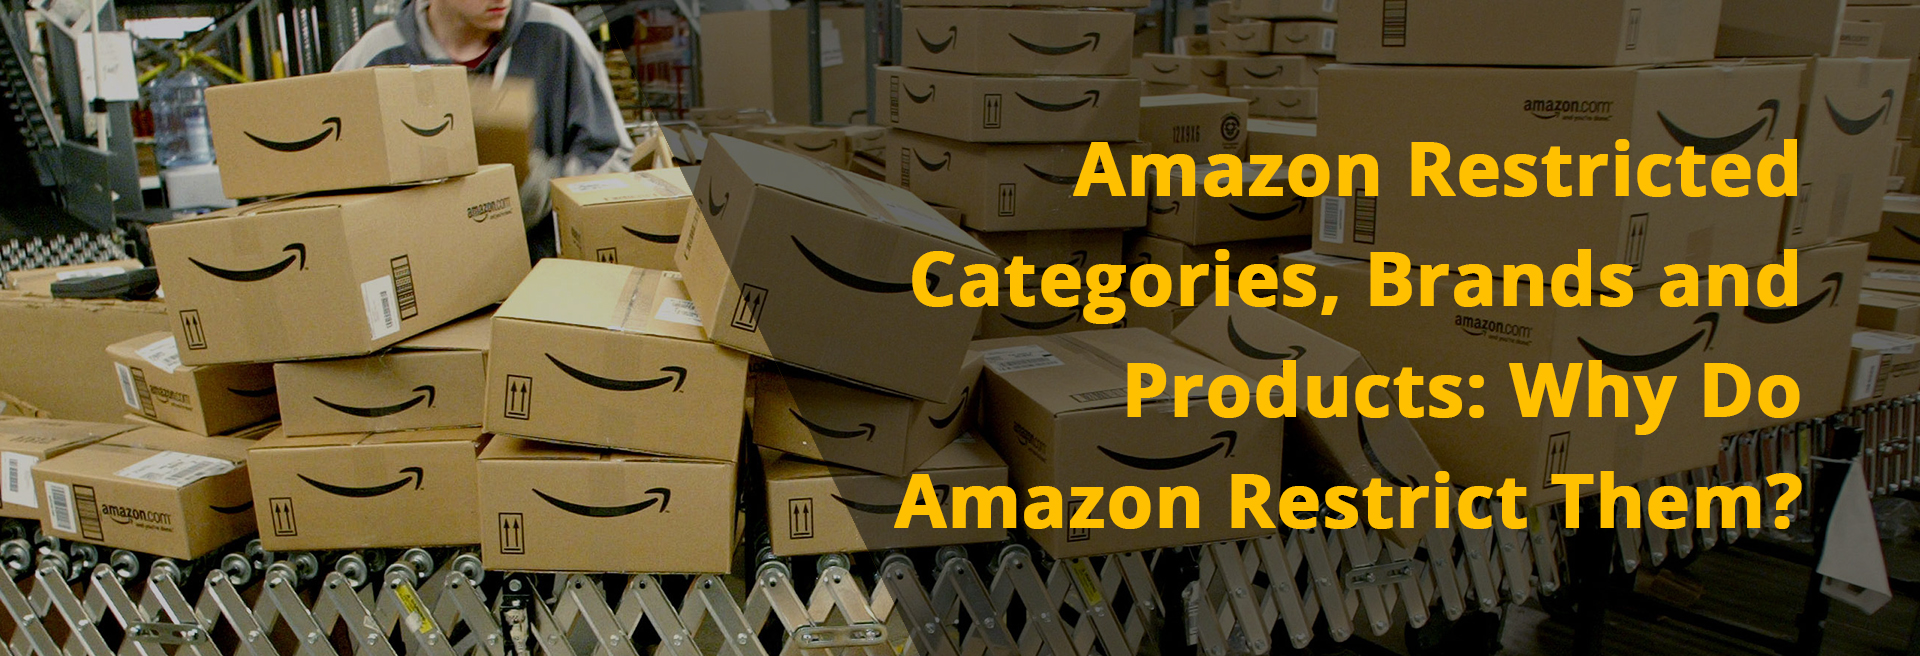 Amazon Restricted Categories Brands and Products